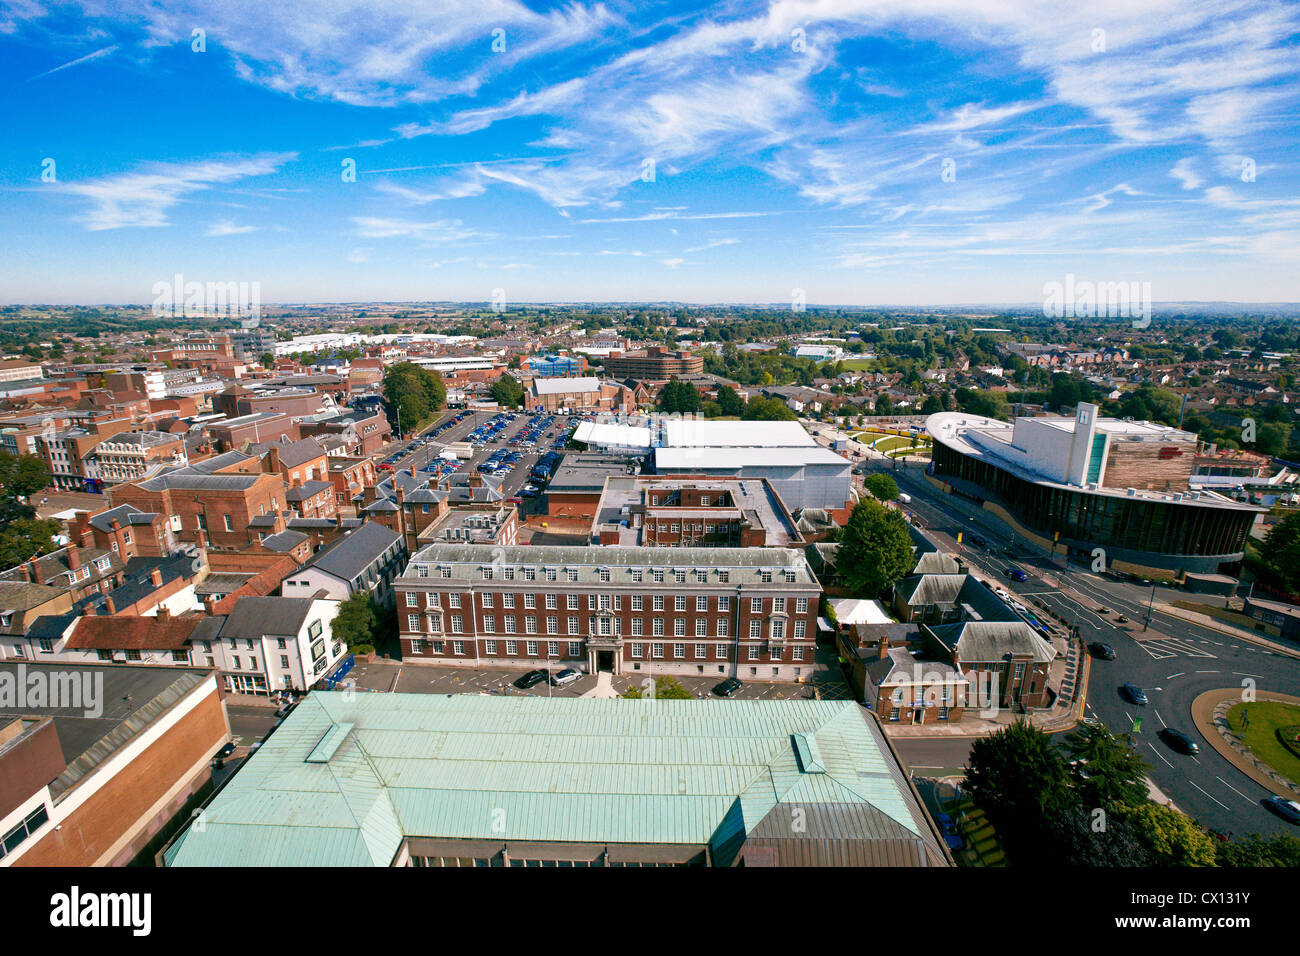 View of Aylesbury, Buckinghamshire including the public library taken from above. Stock Photo